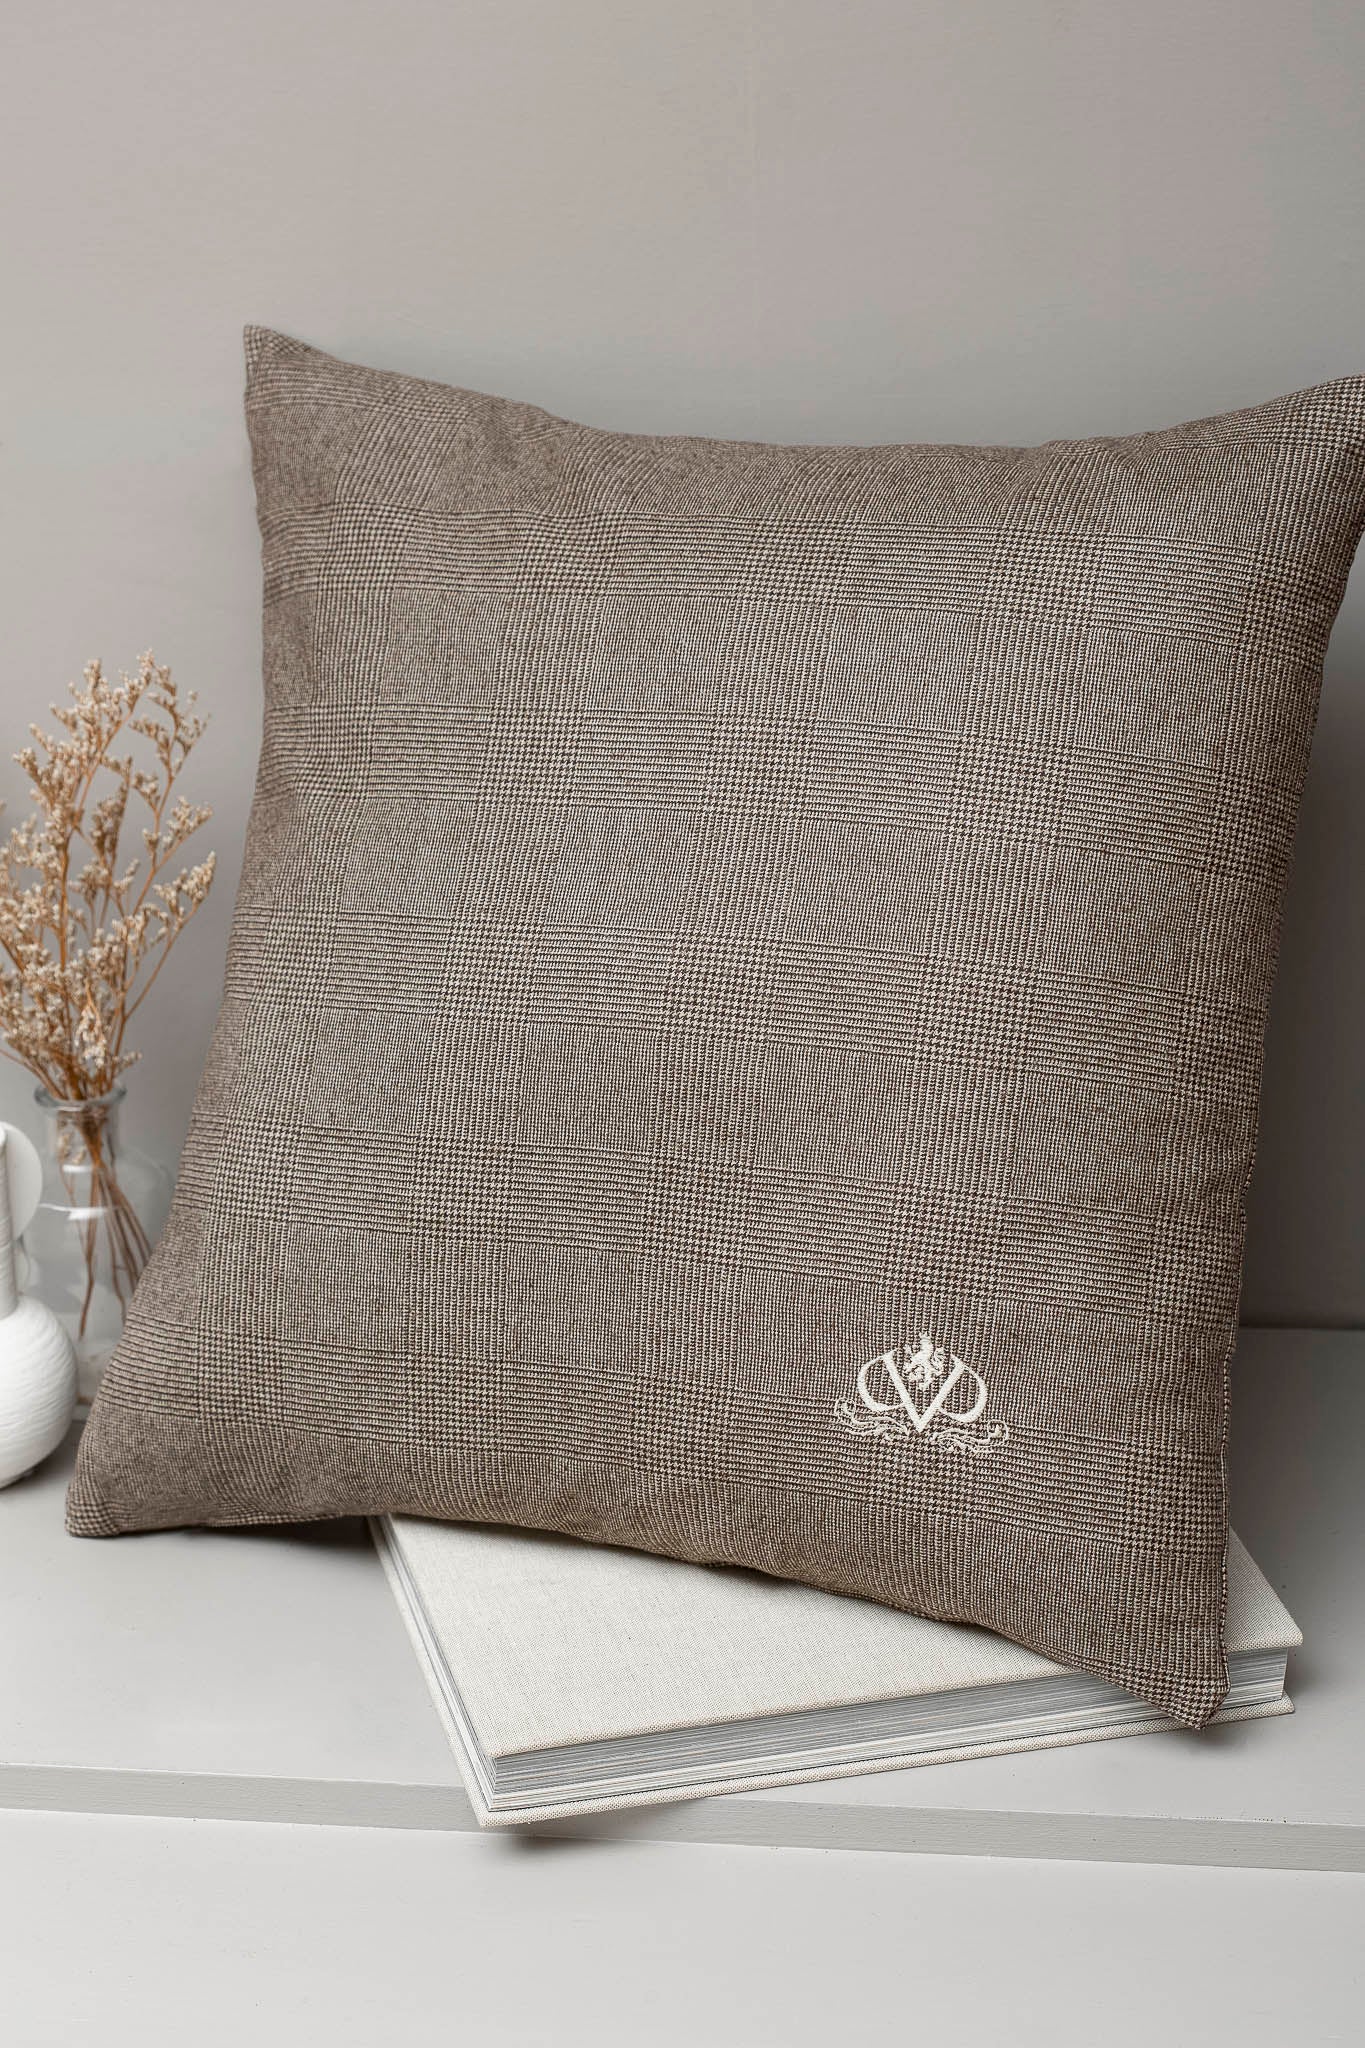 Coussin en laine Prince de Galles taupe - Made in Italy